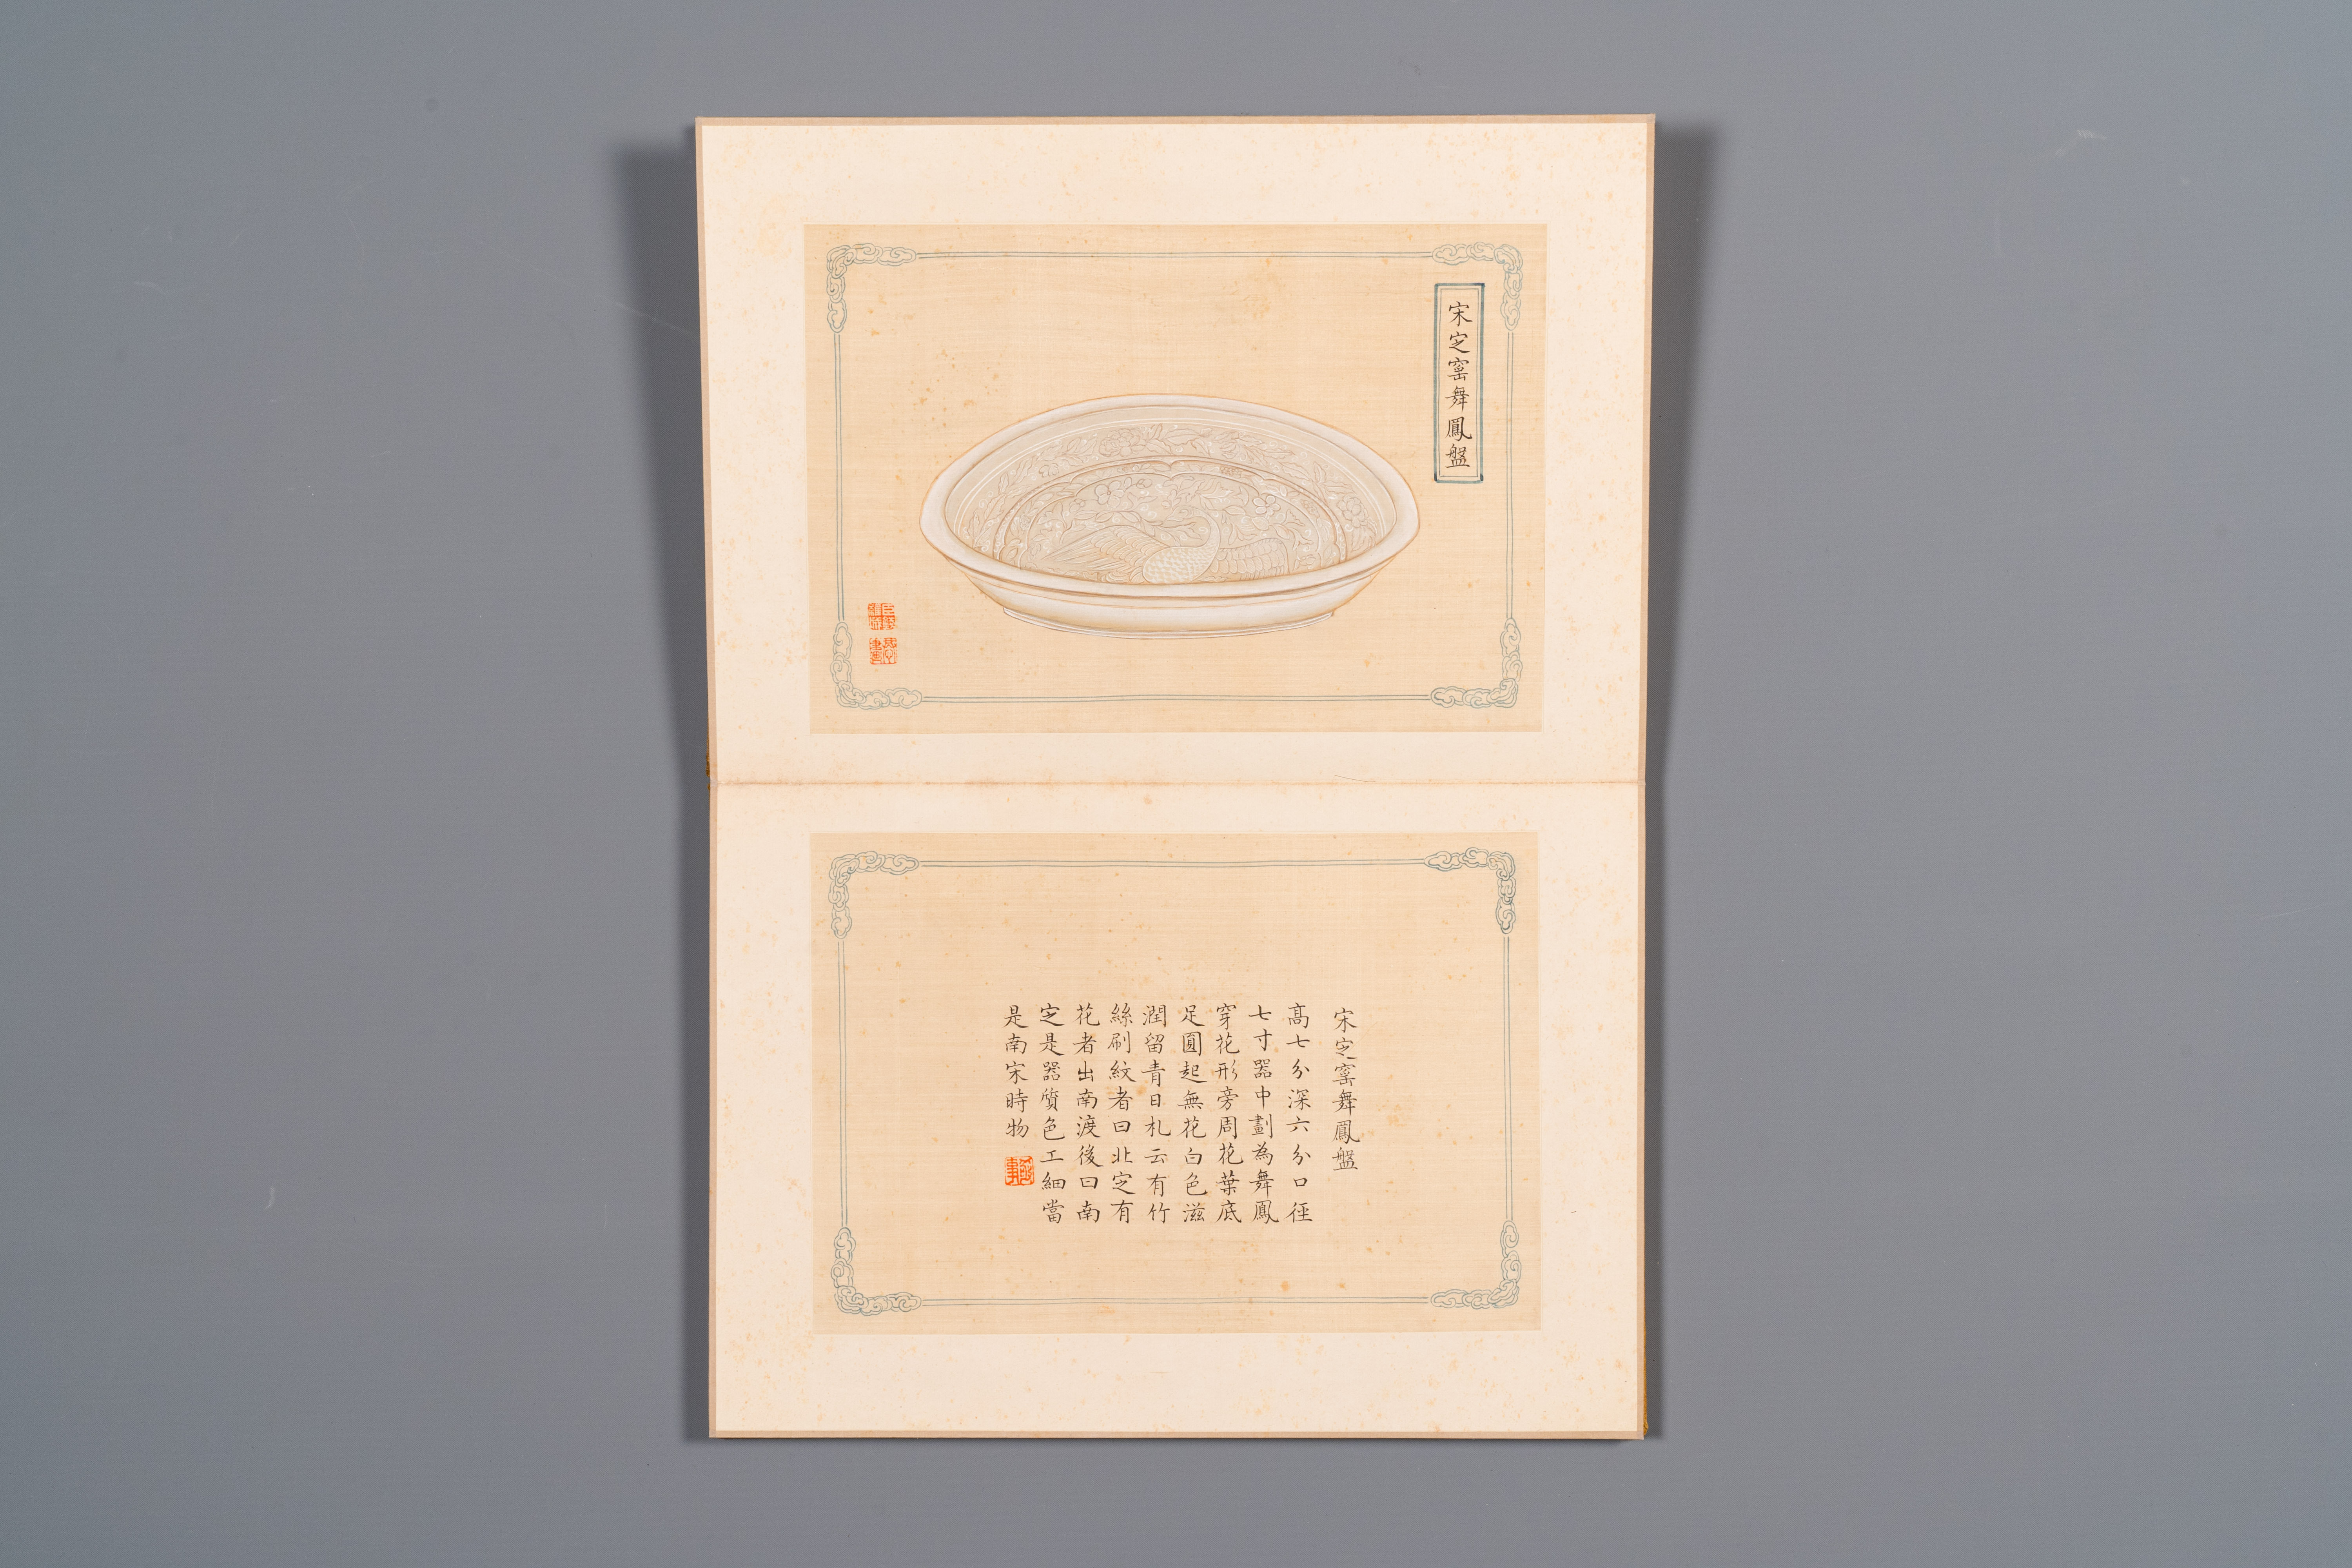 A Chinese 'imperial porcelain' album, ink and color on silk, Qianlong seal mark, 20th C. - Image 7 of 11